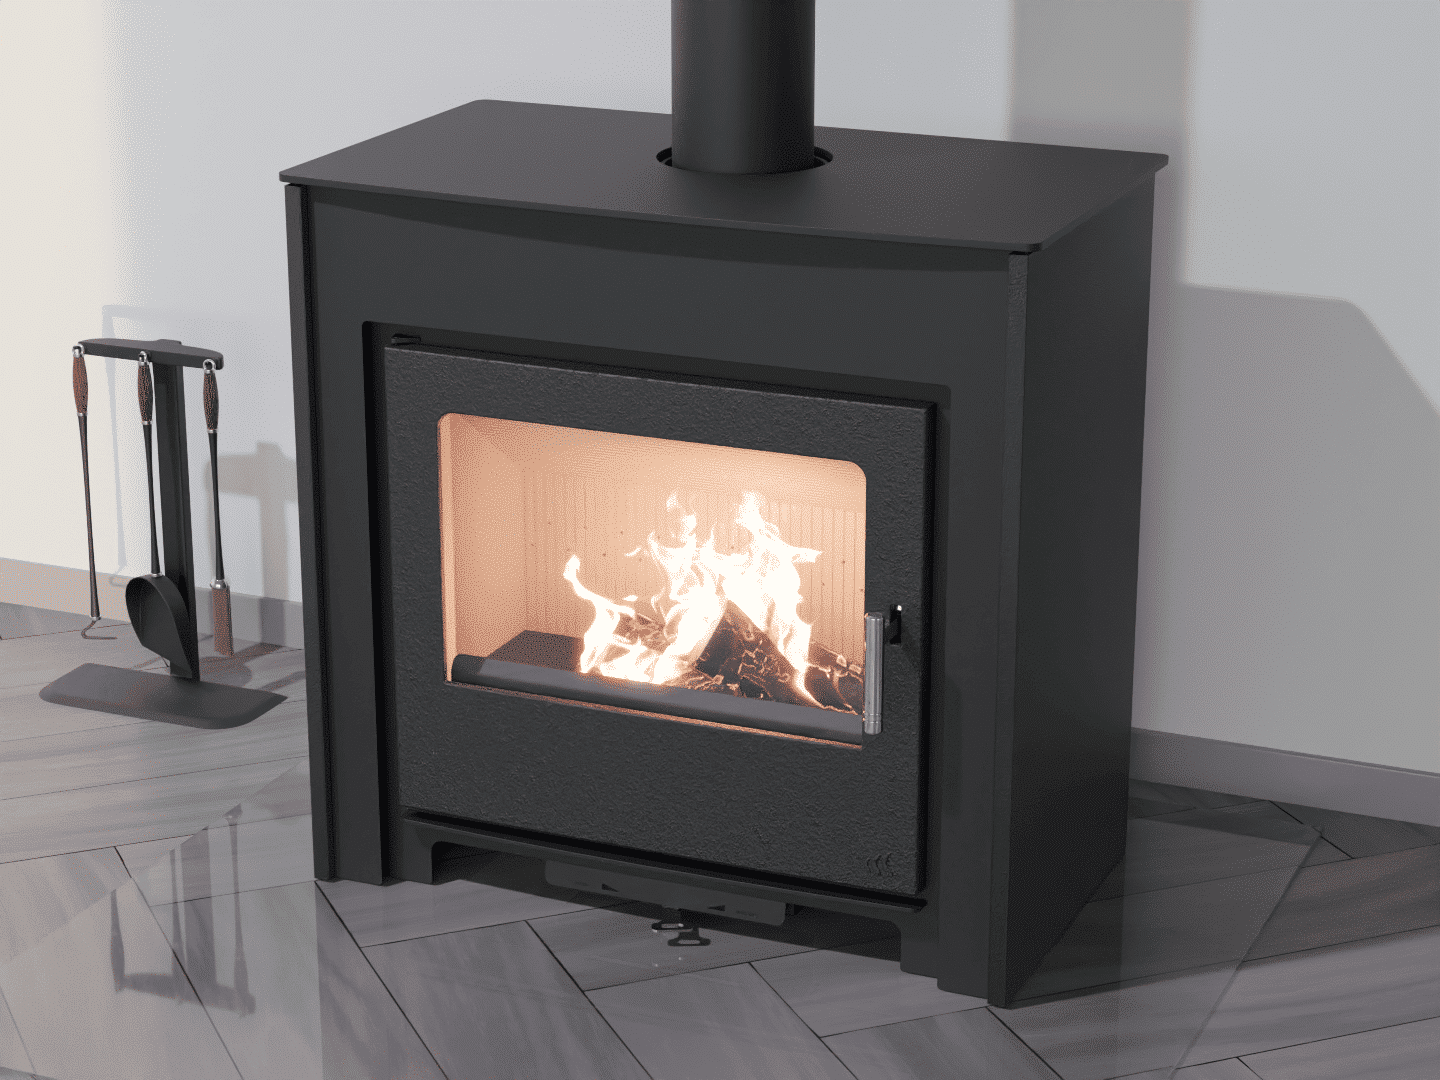 2101_Fireplace stove with heat exchanger_Slate Grey